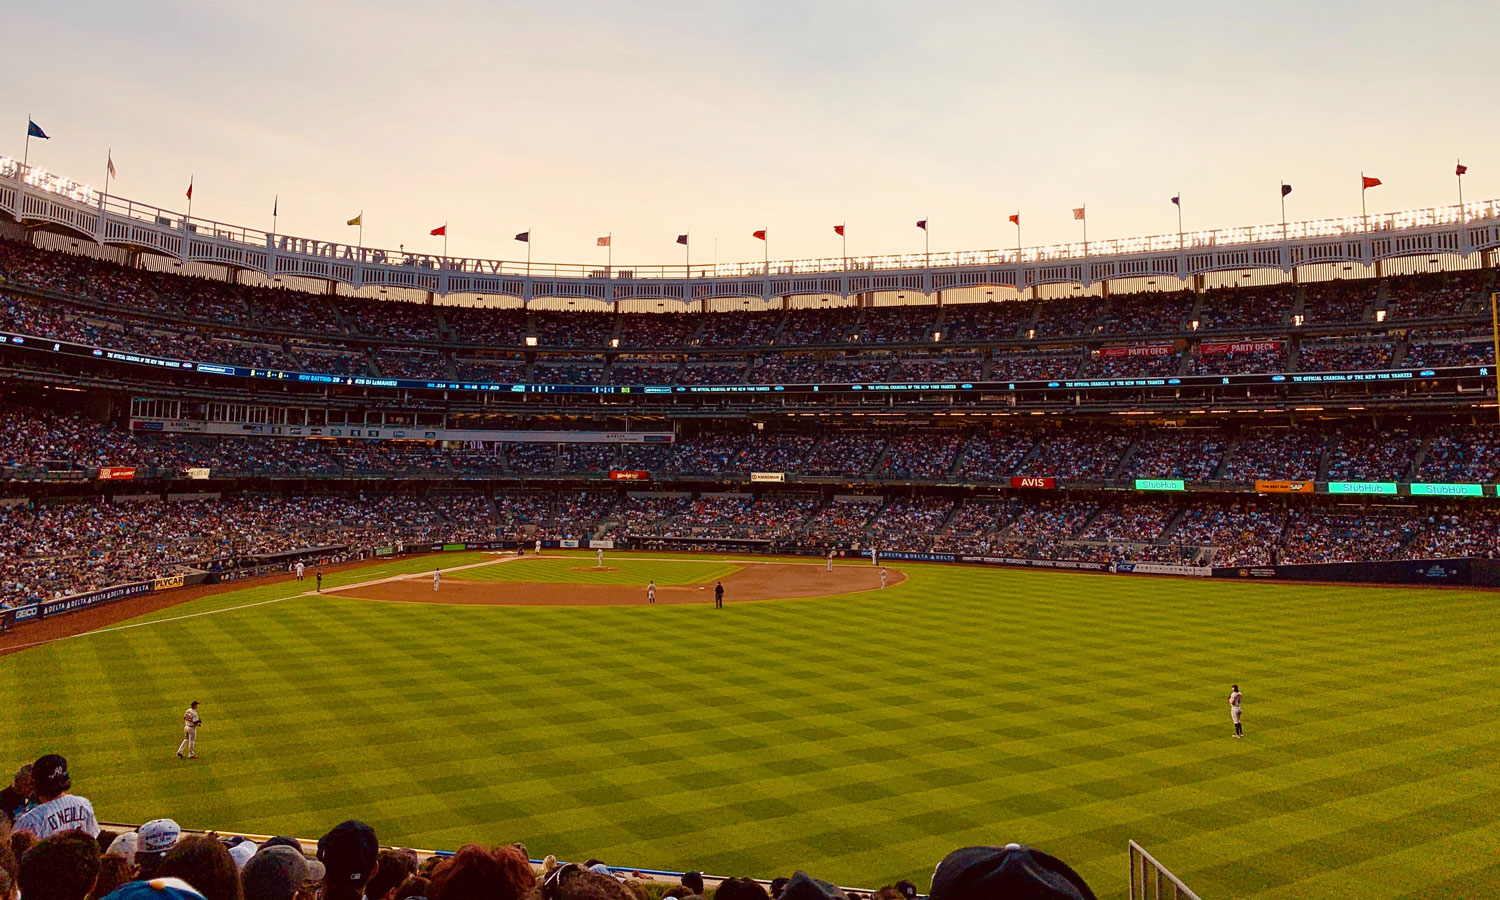 market research case study - improved customer experience for professional sports team